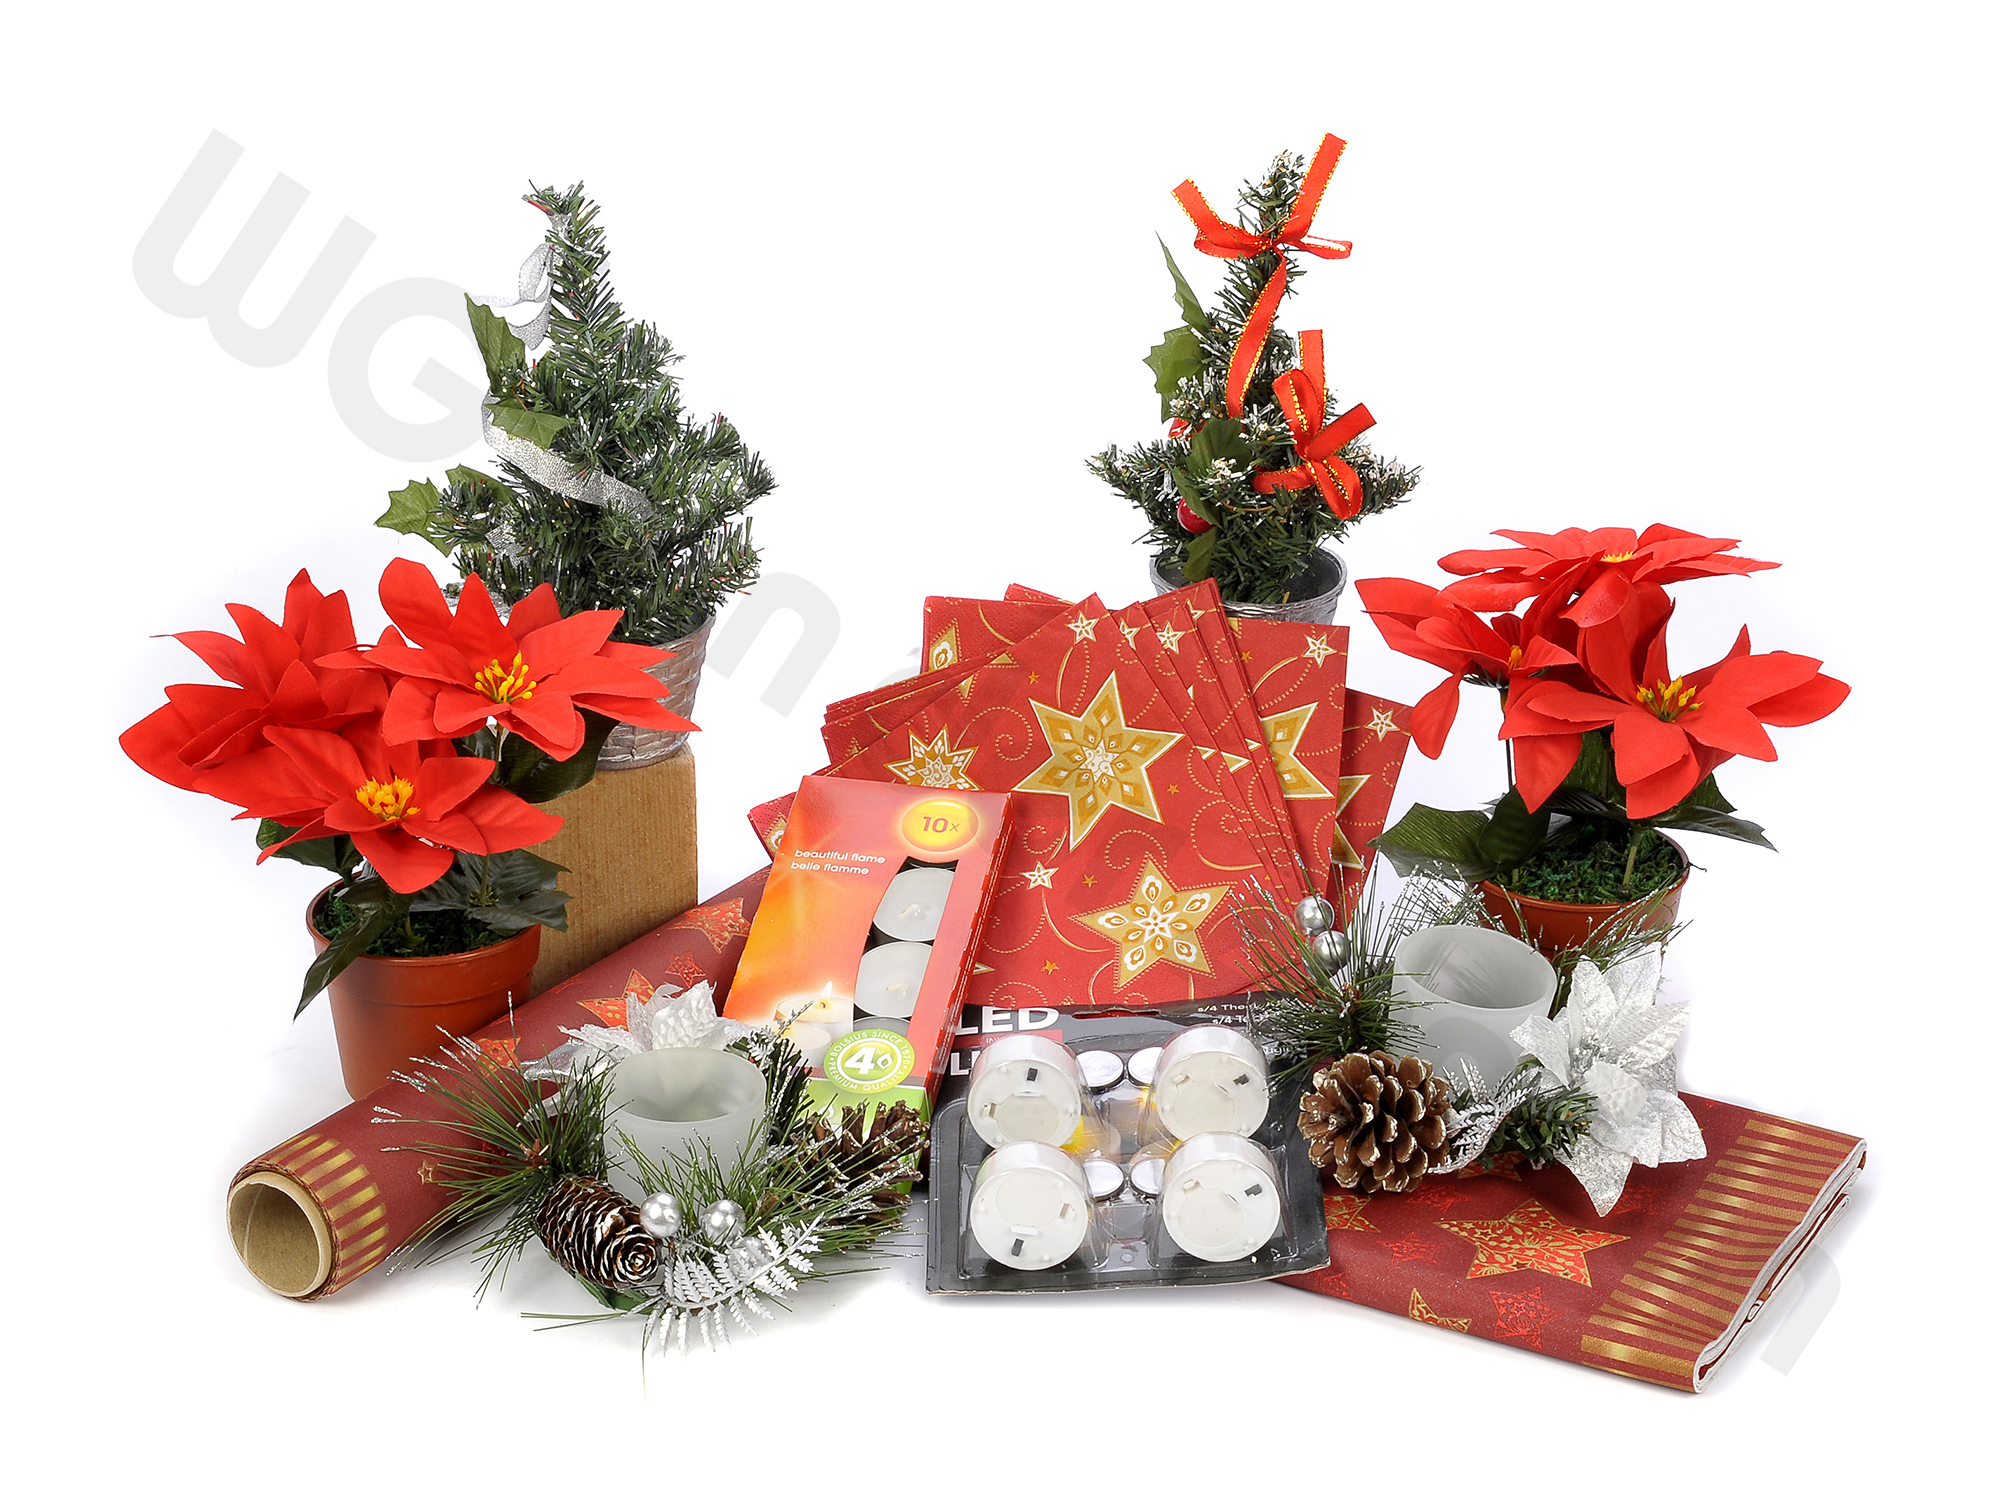 980220 XMAS DECORATION SET FOR TABLE